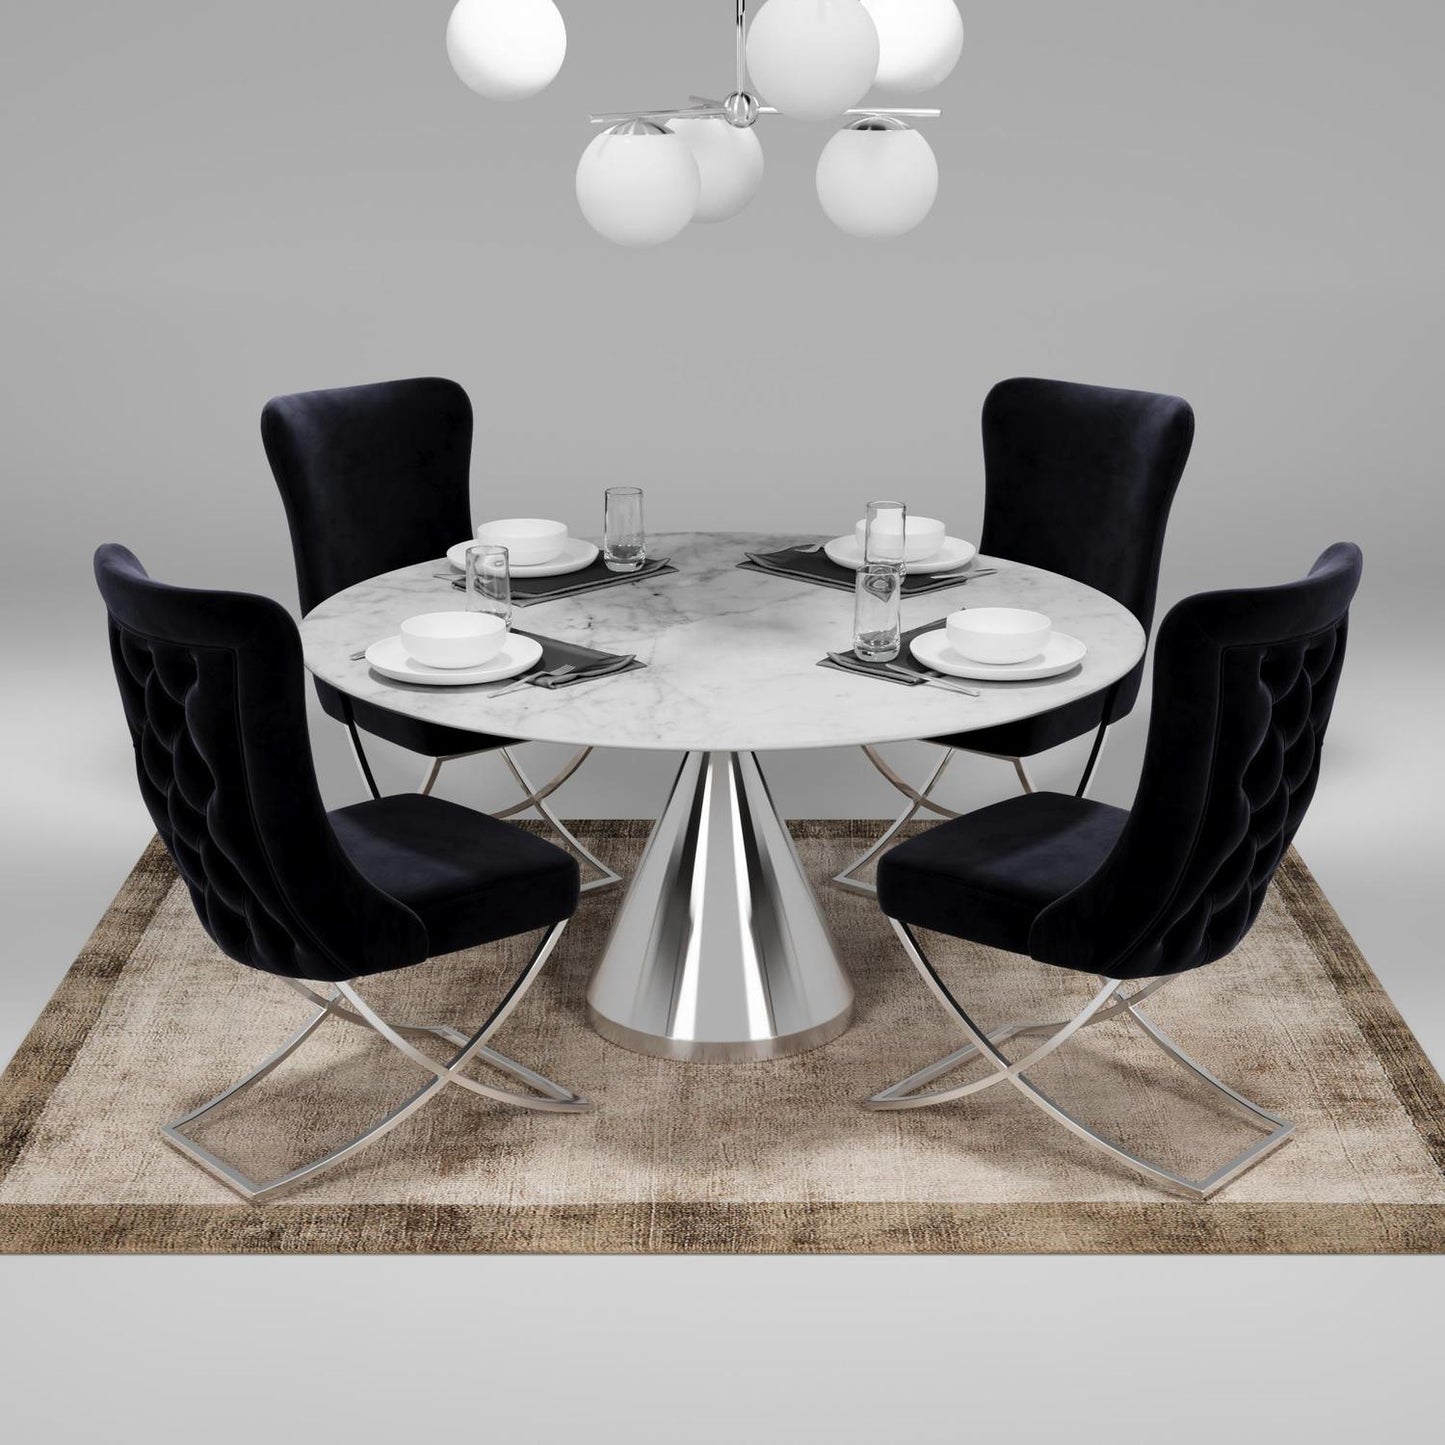 Sultan Collection Wing Back, Modern design, upholstered dining chair in Black with Silver Metal legs in a dining room with set of four chairs around a round table.